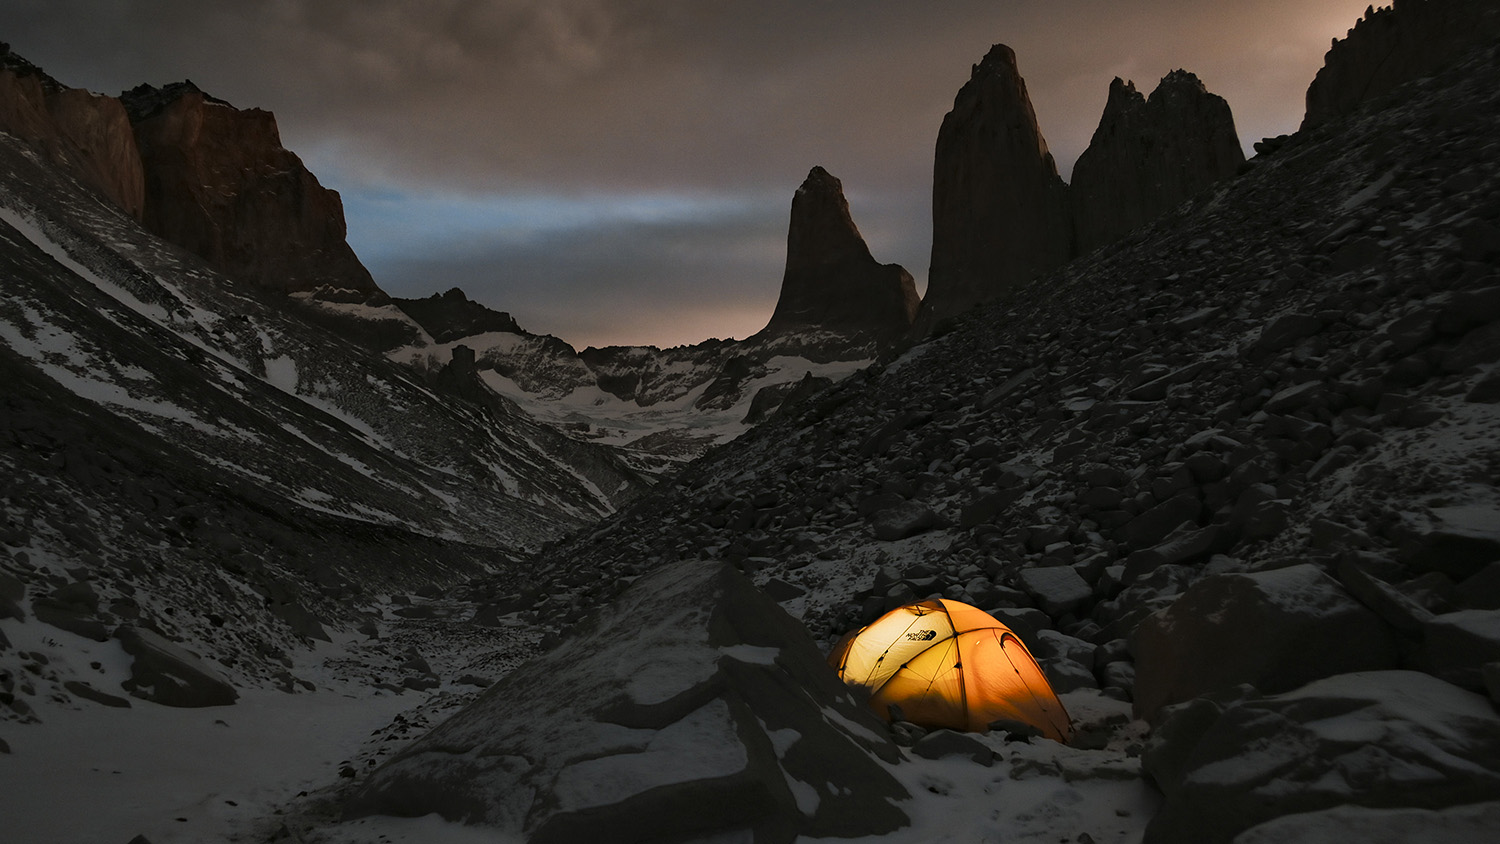 Night shot of a tent nestled between the rocks.